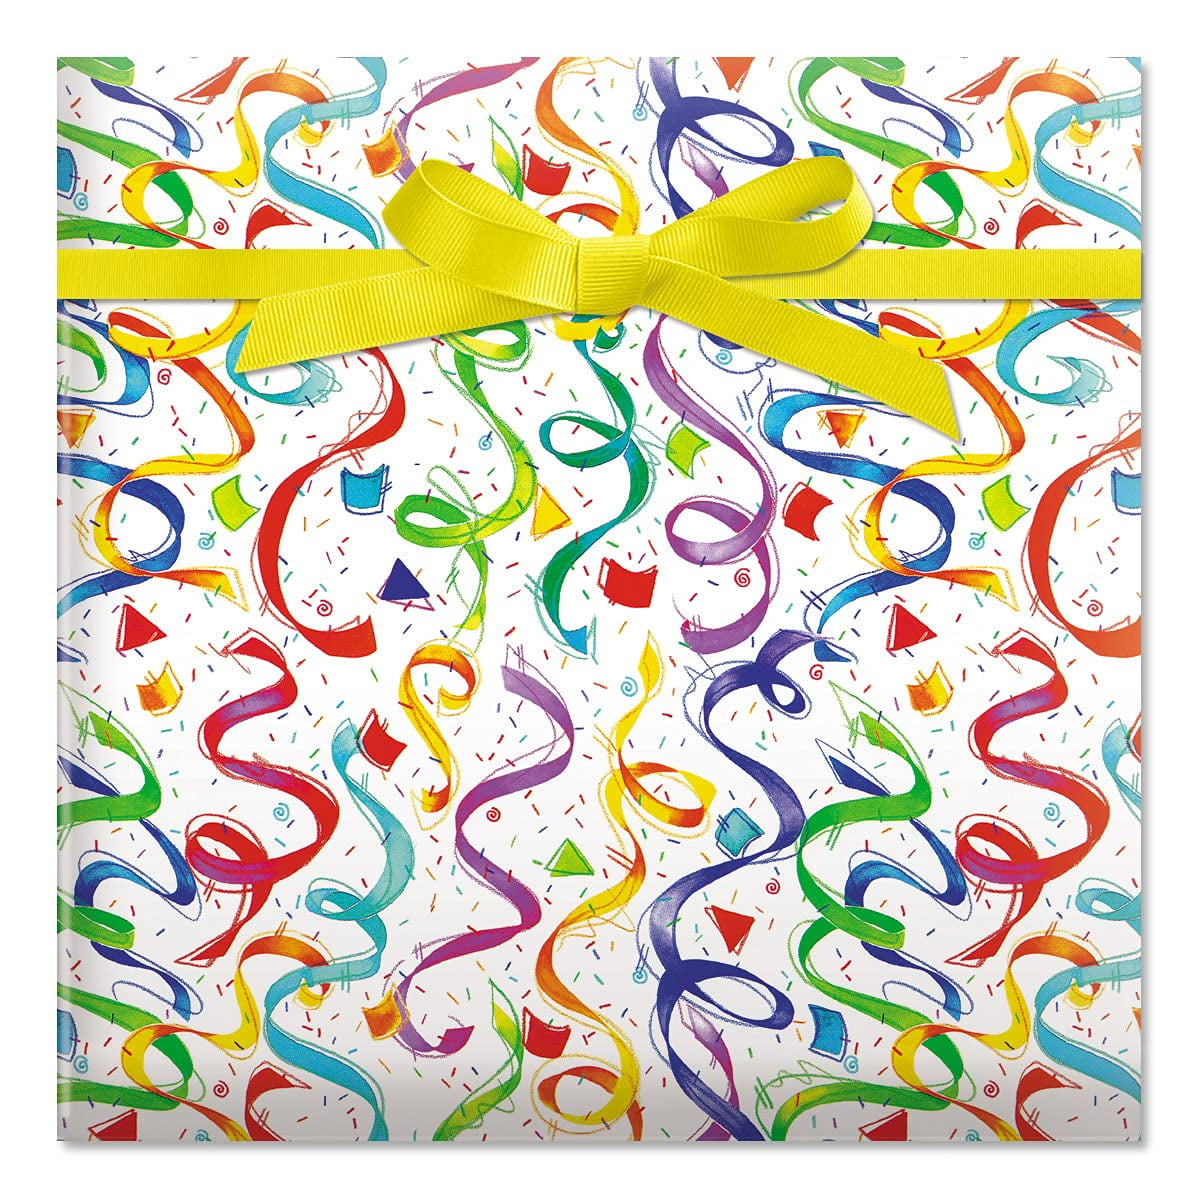 Balloons and Confetti Gift Wrapping Paper - 76 cm x 2.44 m Roll